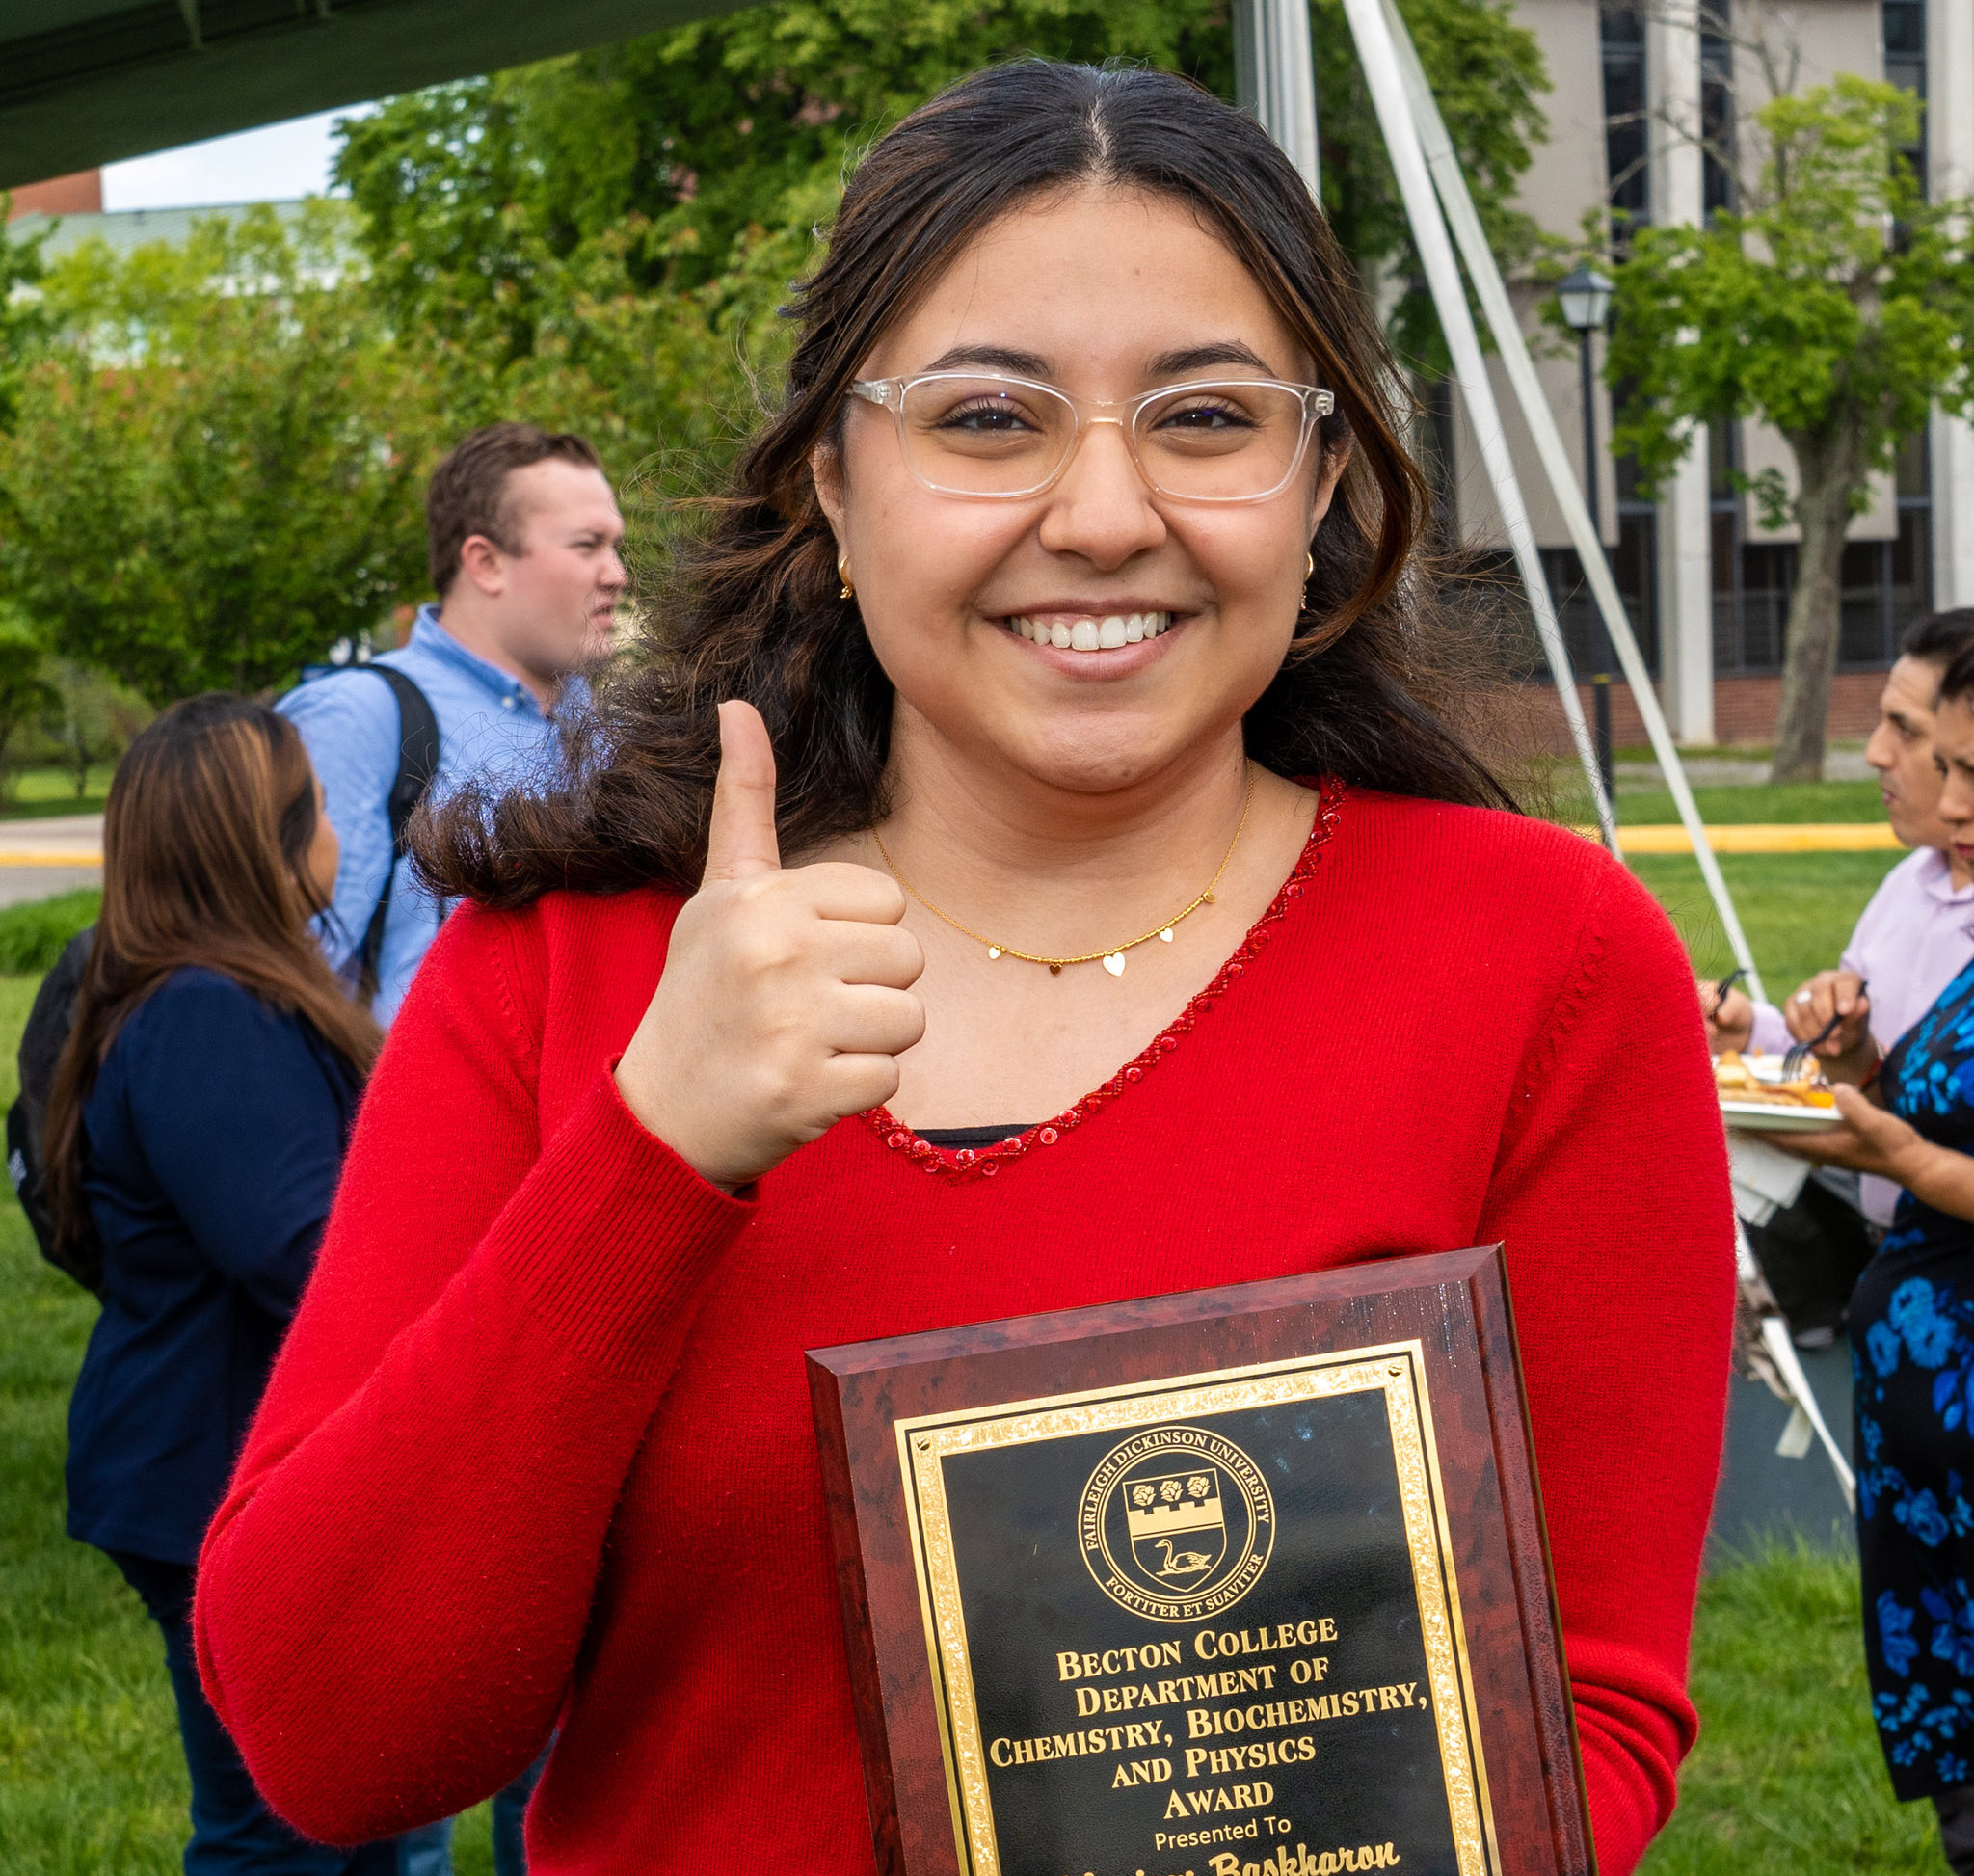 A young woman holding up an award gives a thumbs up.